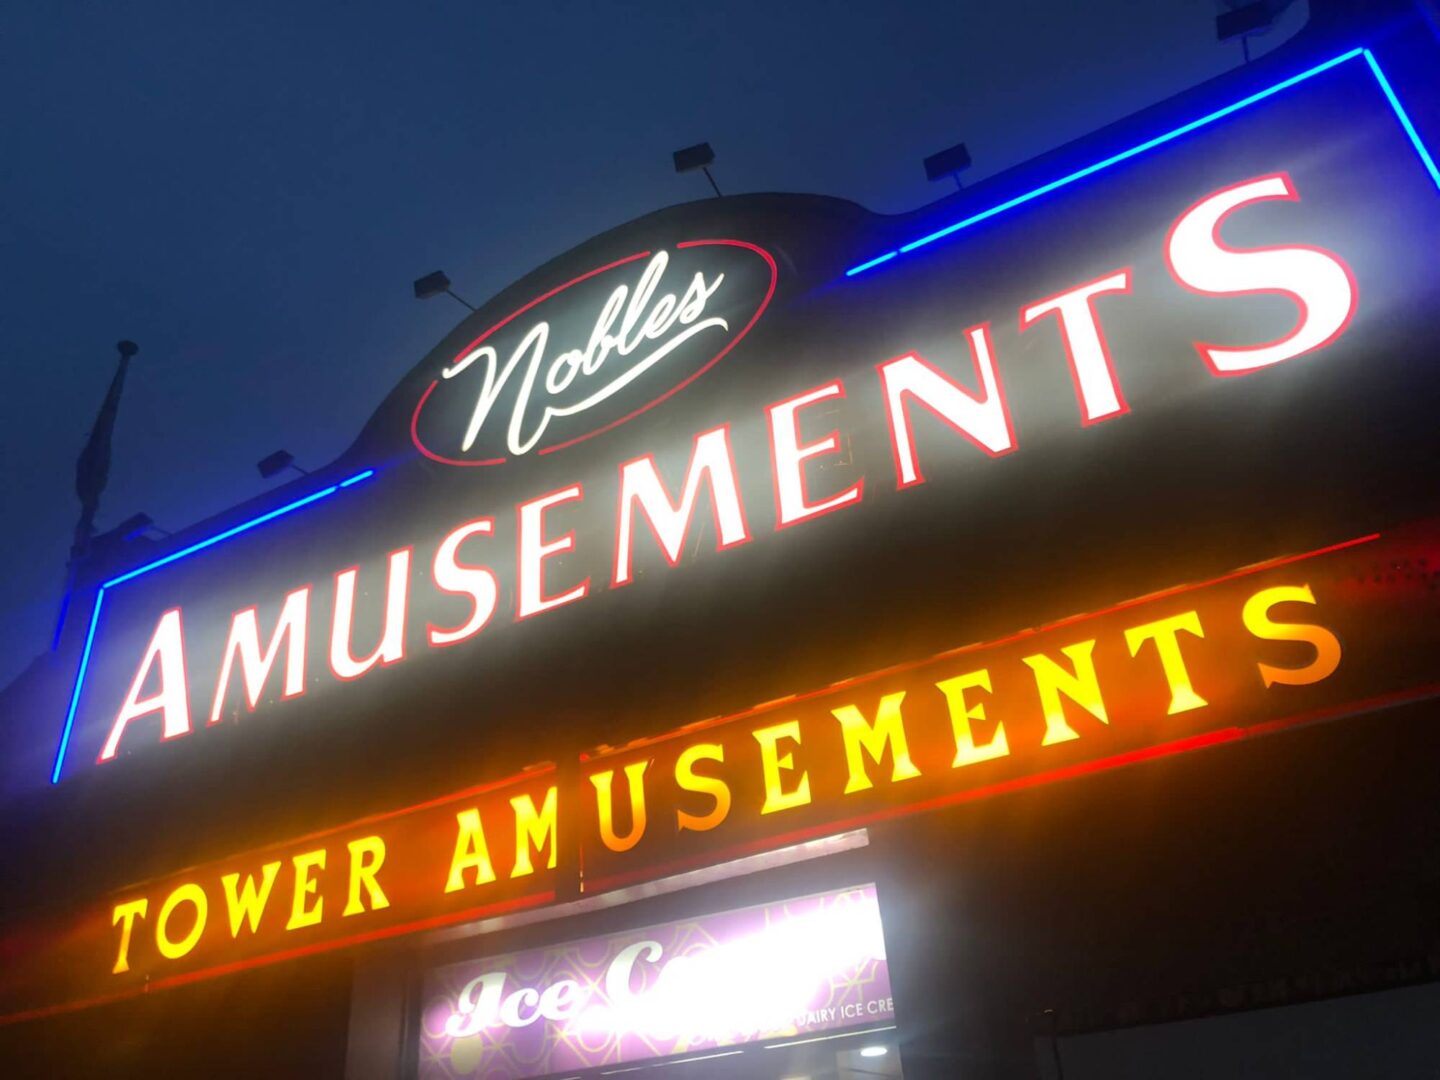 Noble's Tower Amusements exterior neon sign at night